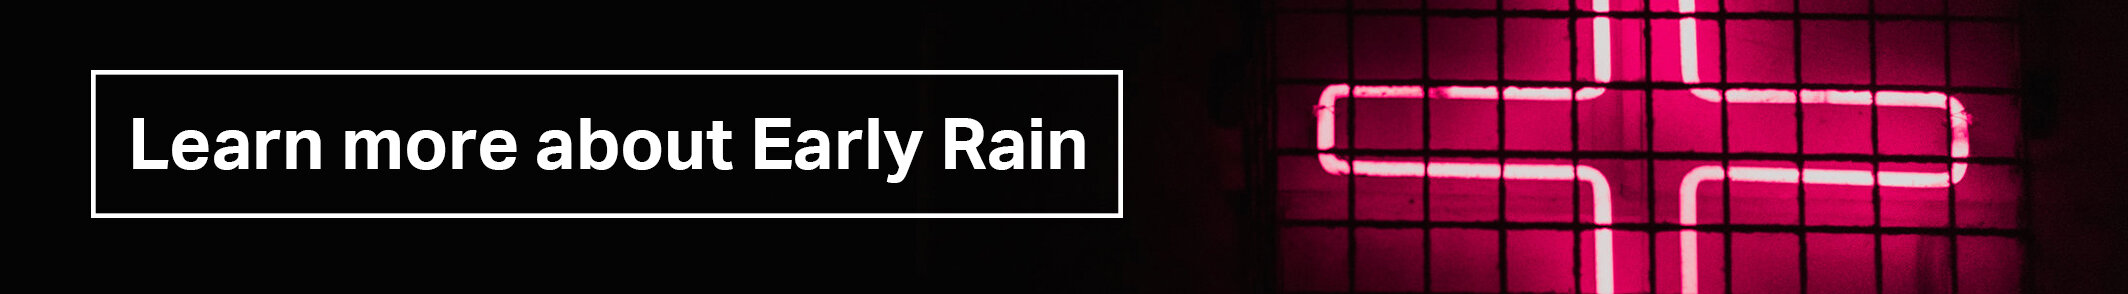 Learn-more-about-Early-Rain-LIVE-Post-button.jpg